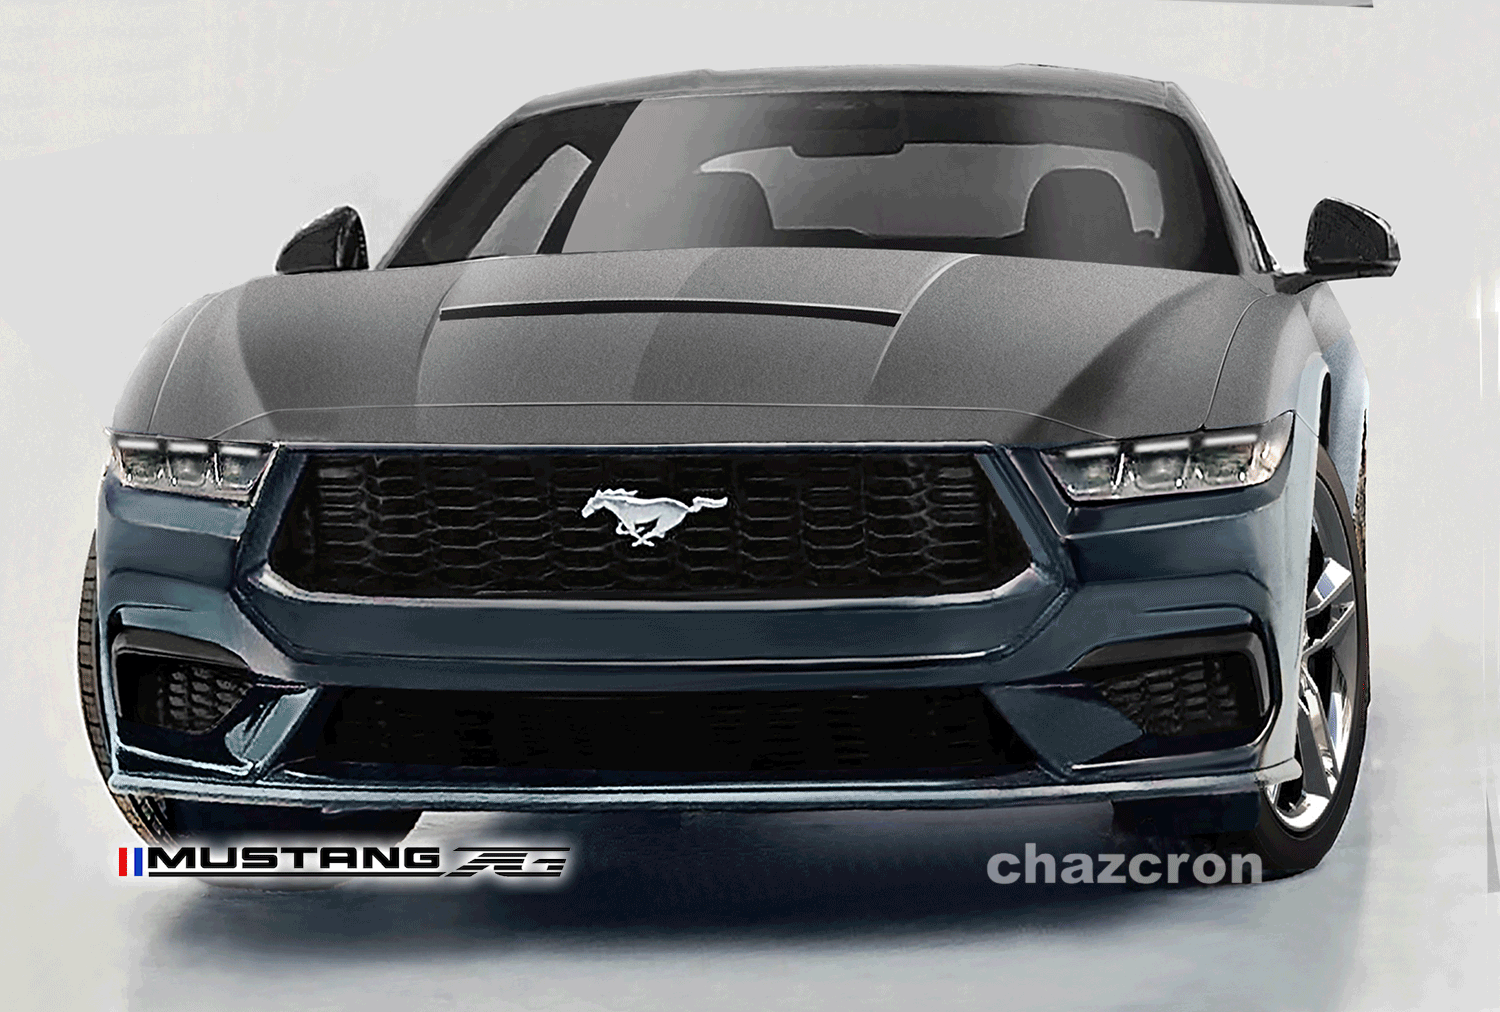 S650 Mustang chazcron weighs in... 7th gen 2023 Mustang S650 3D model & renderings in several colors! GreyM7G_Overlay